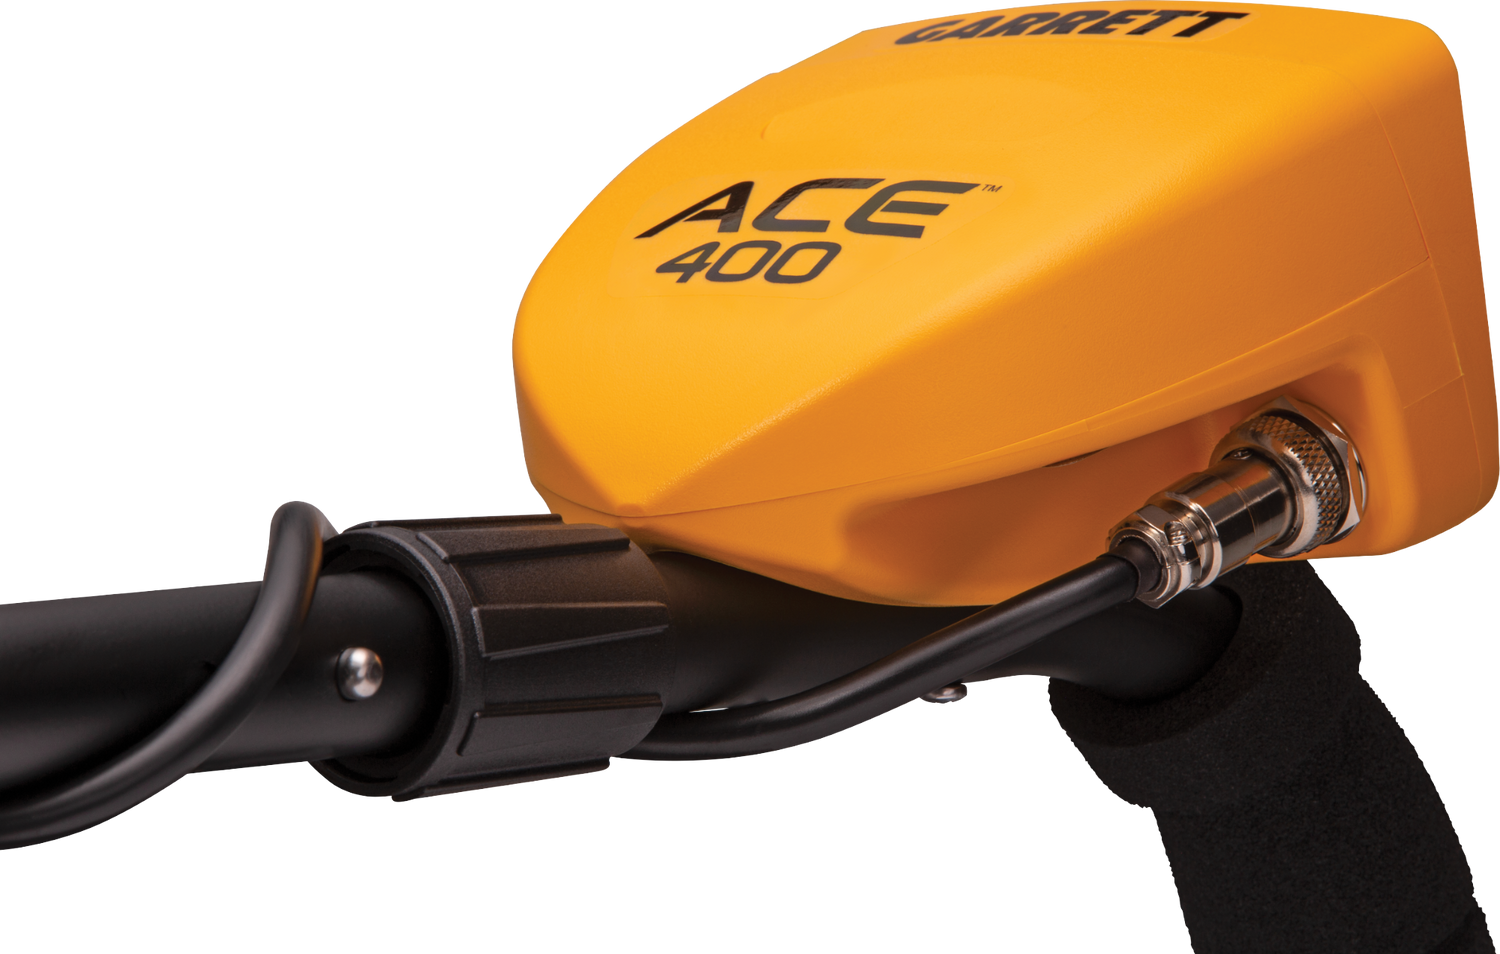 Ace 400 Metal Detector With 8.5